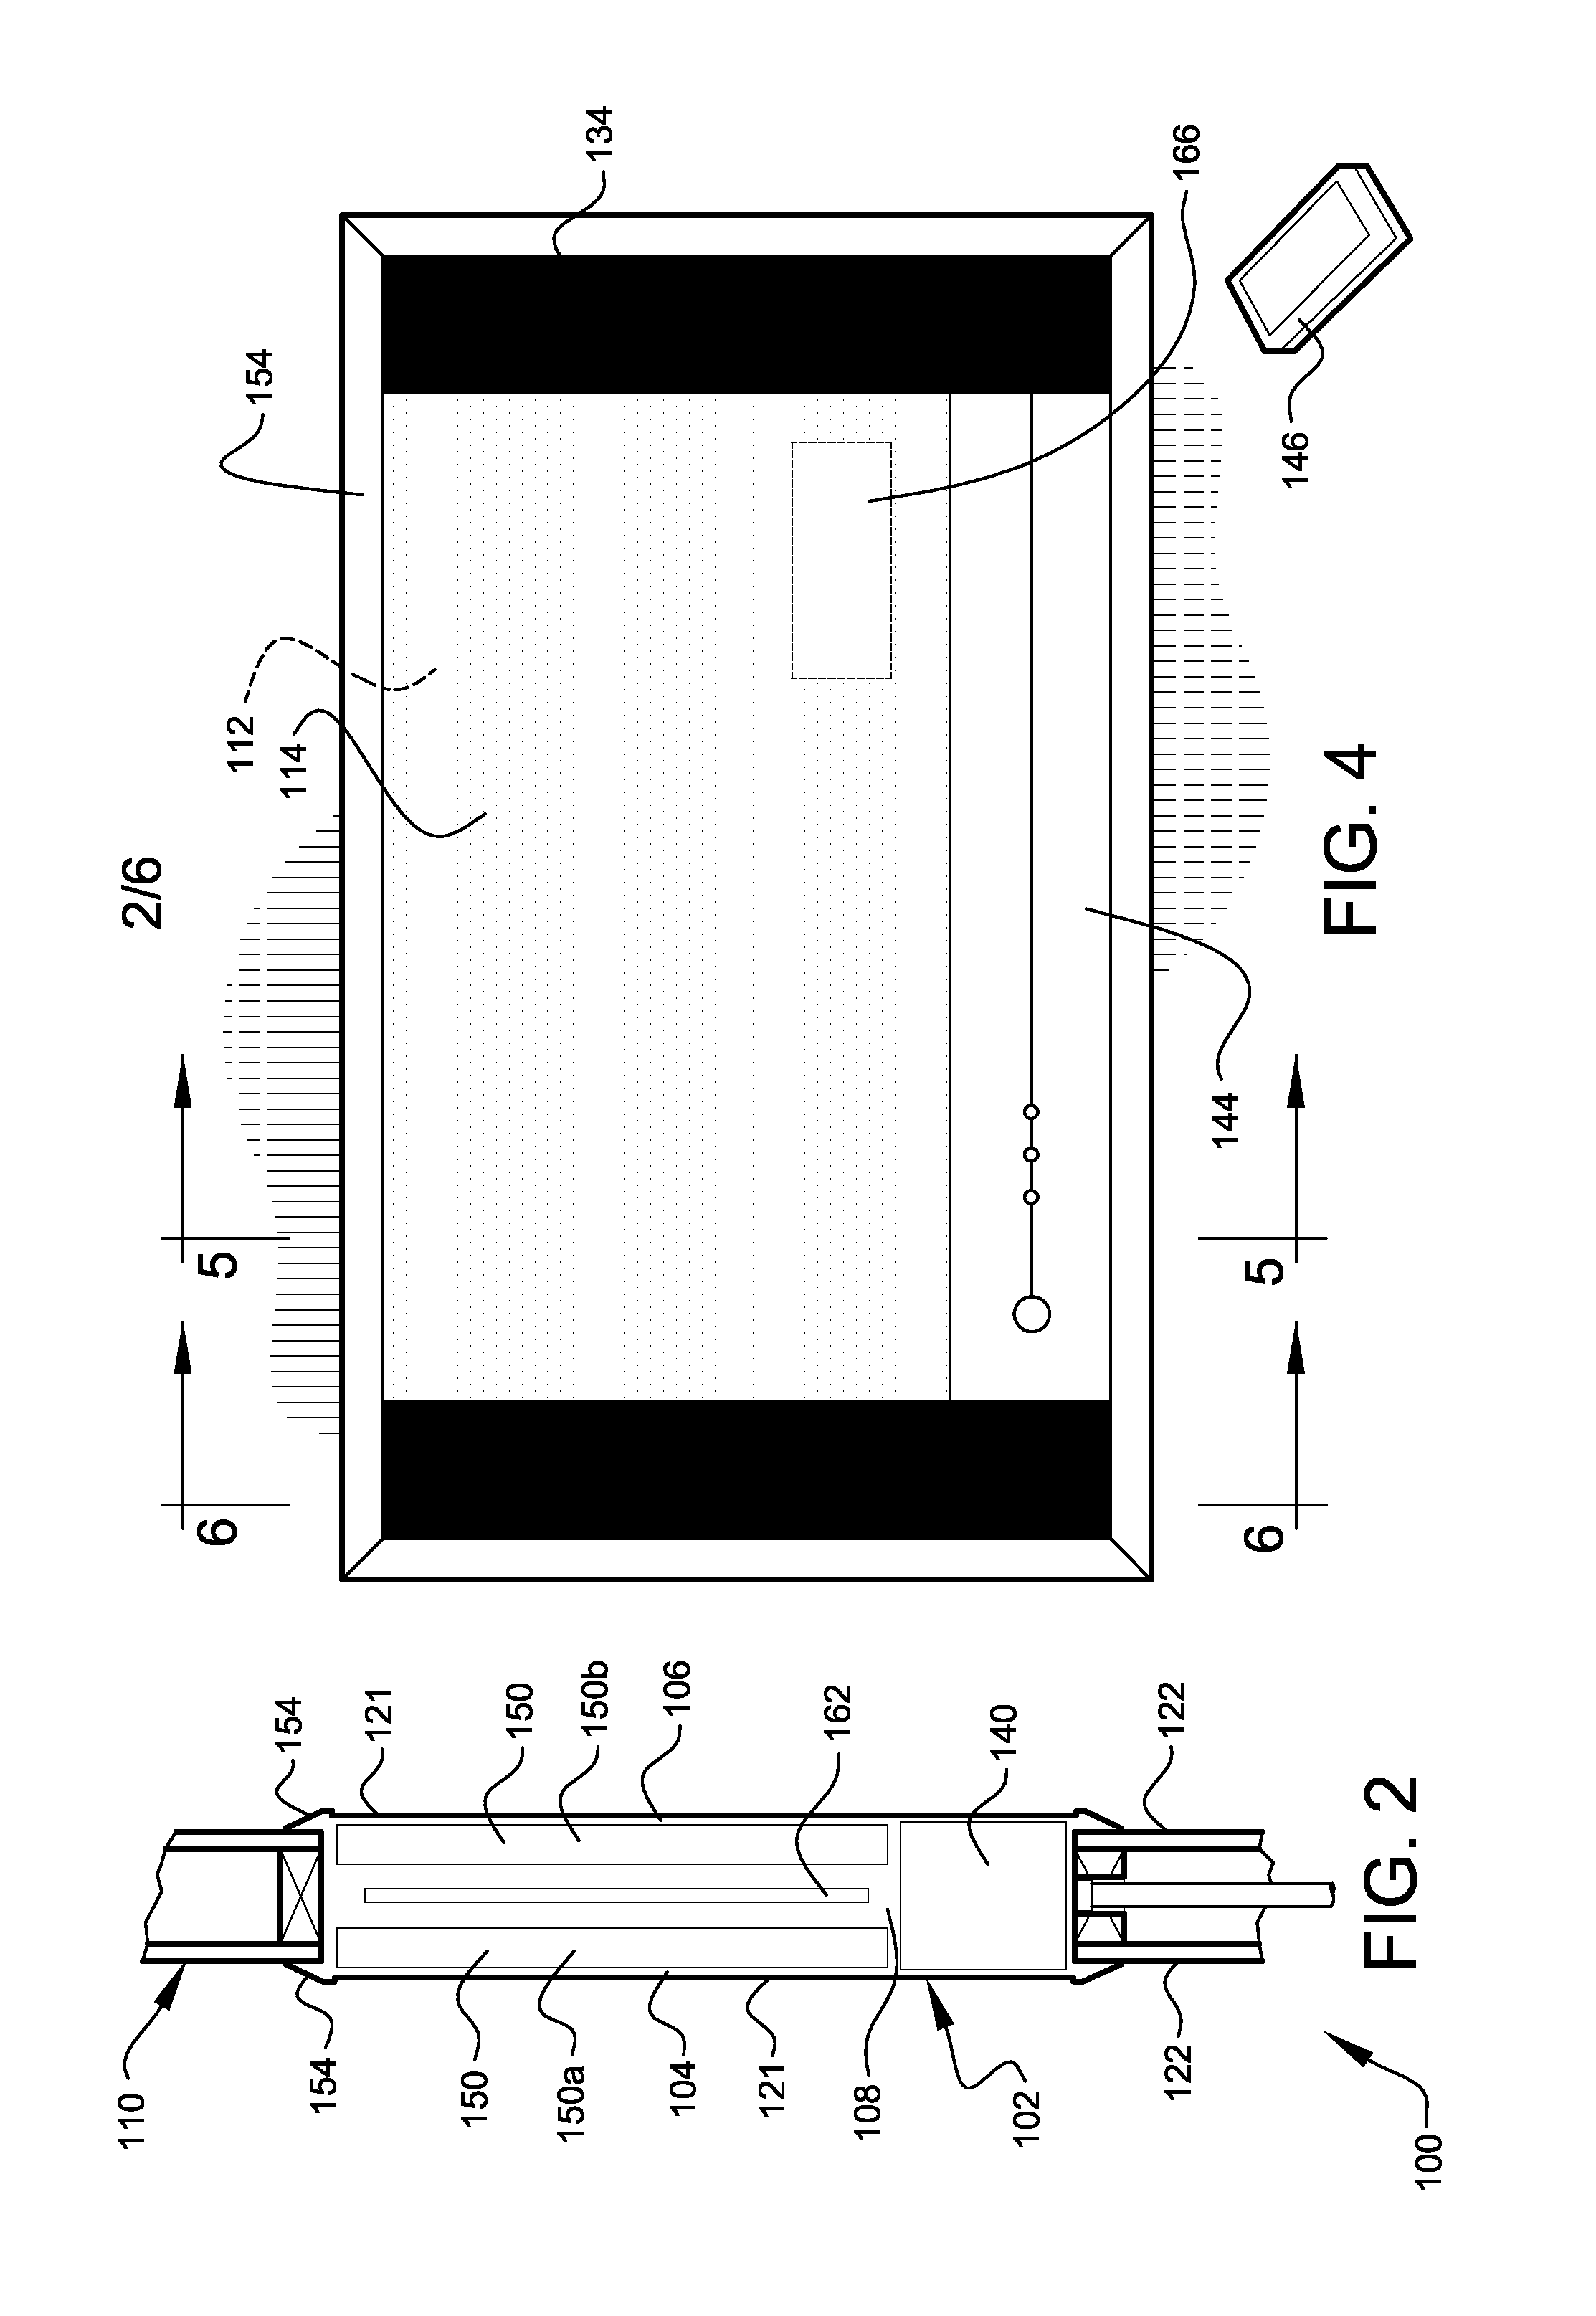 Electronic image display systems